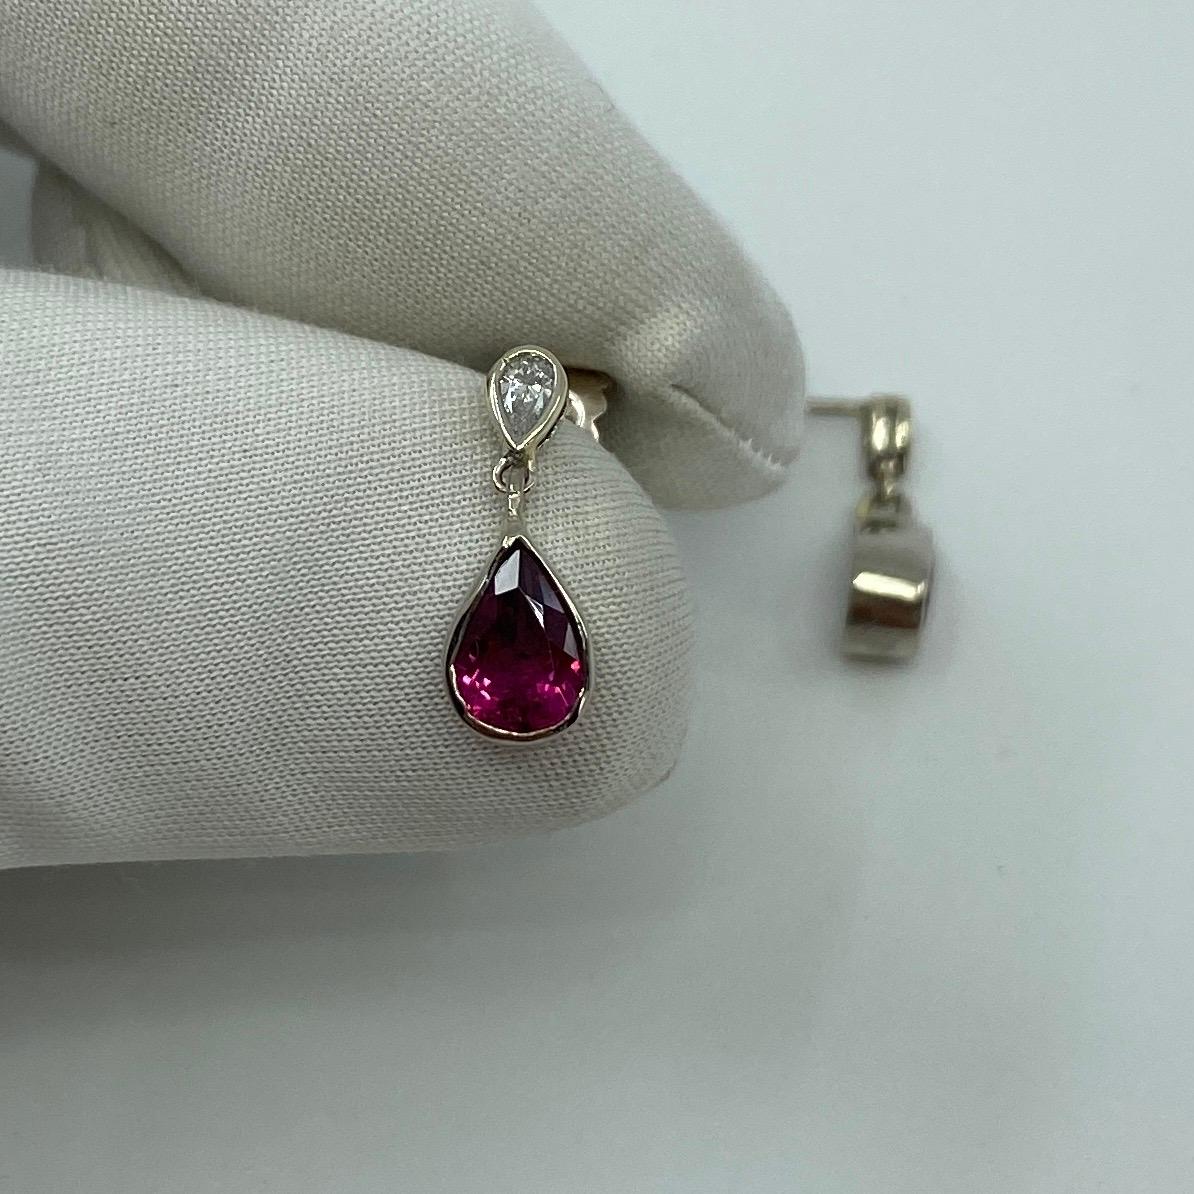 Pink Tourmaline & Diamond 18 Karat White Gold Earring Studs.

Beautiful handmade 1.20 carat vivid pink tourmaline & diamond earring studs with G/H Colour Si1/2 clarity. All stones have excellent clarity and an excellent cut.

Top quality, beautiful